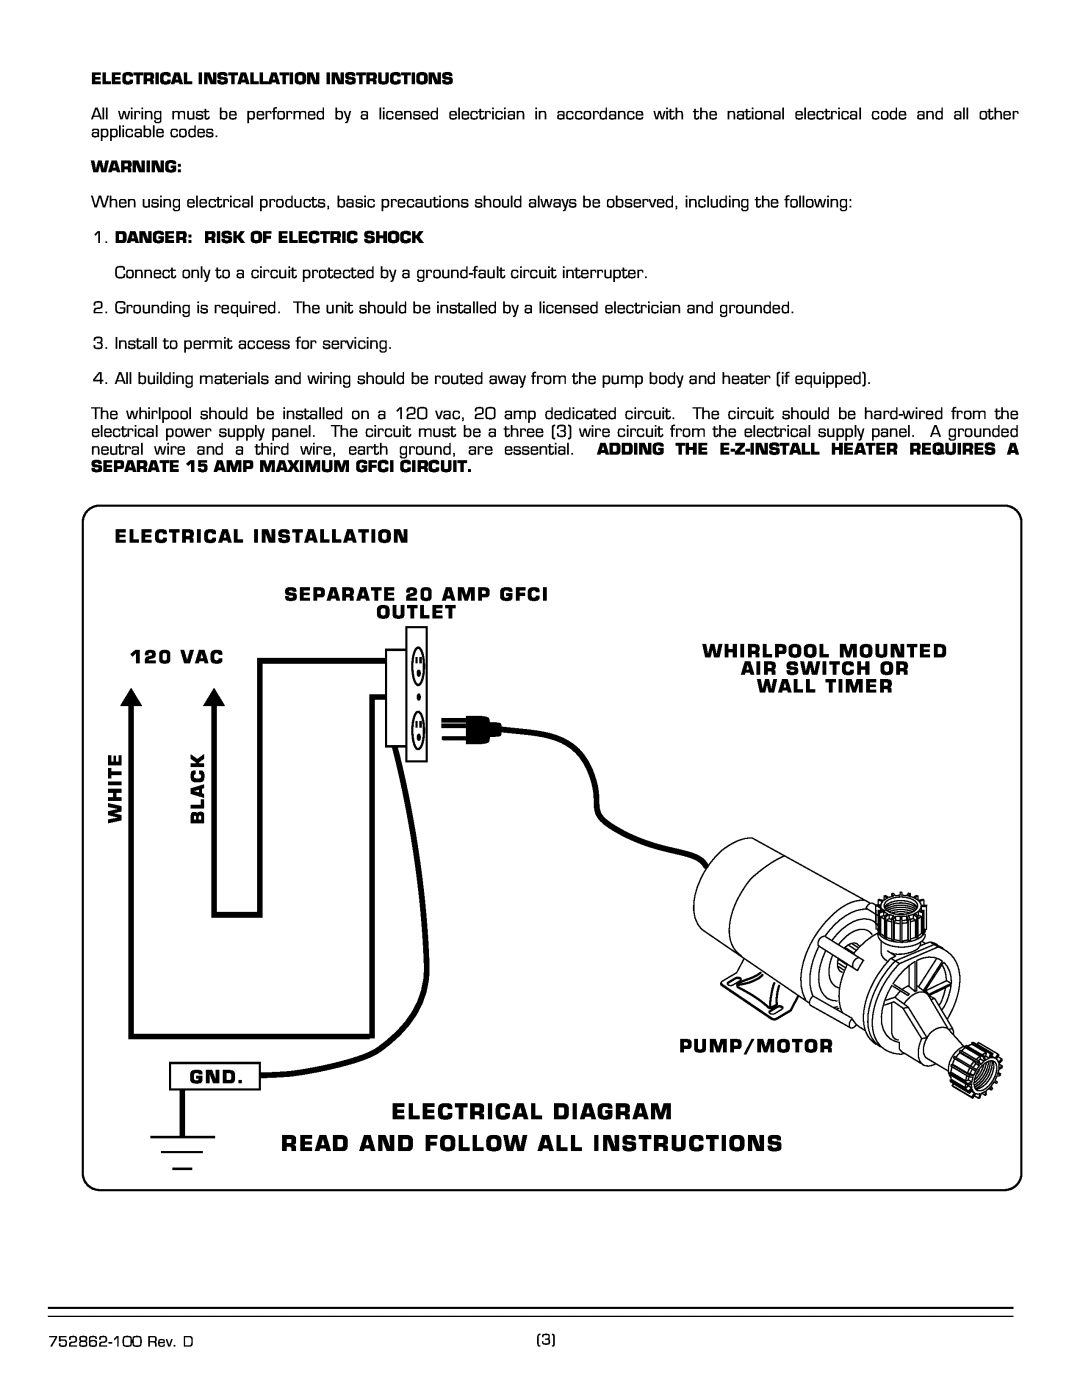 American Standard 2773E Series installation instructions Electrical Diagram, Read And Follow All Instructions 